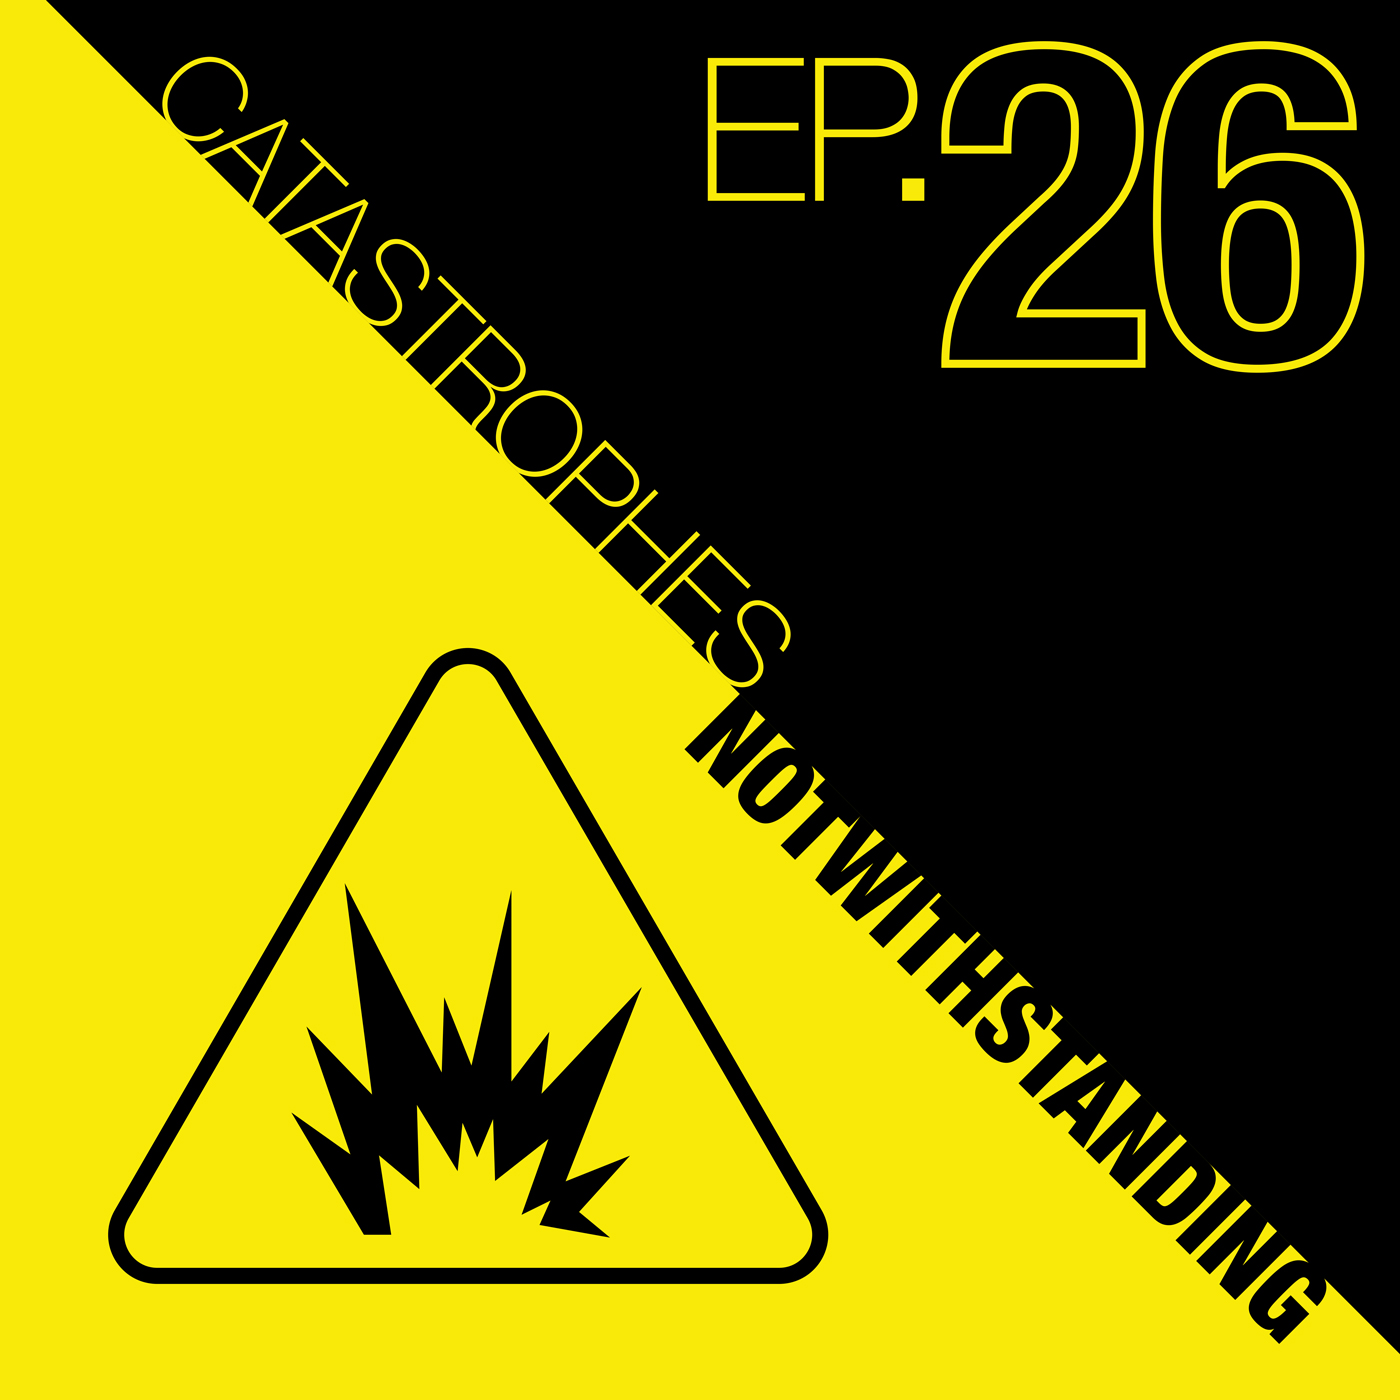 Cover Image of Catastrophes Notwithstanding Episode 26